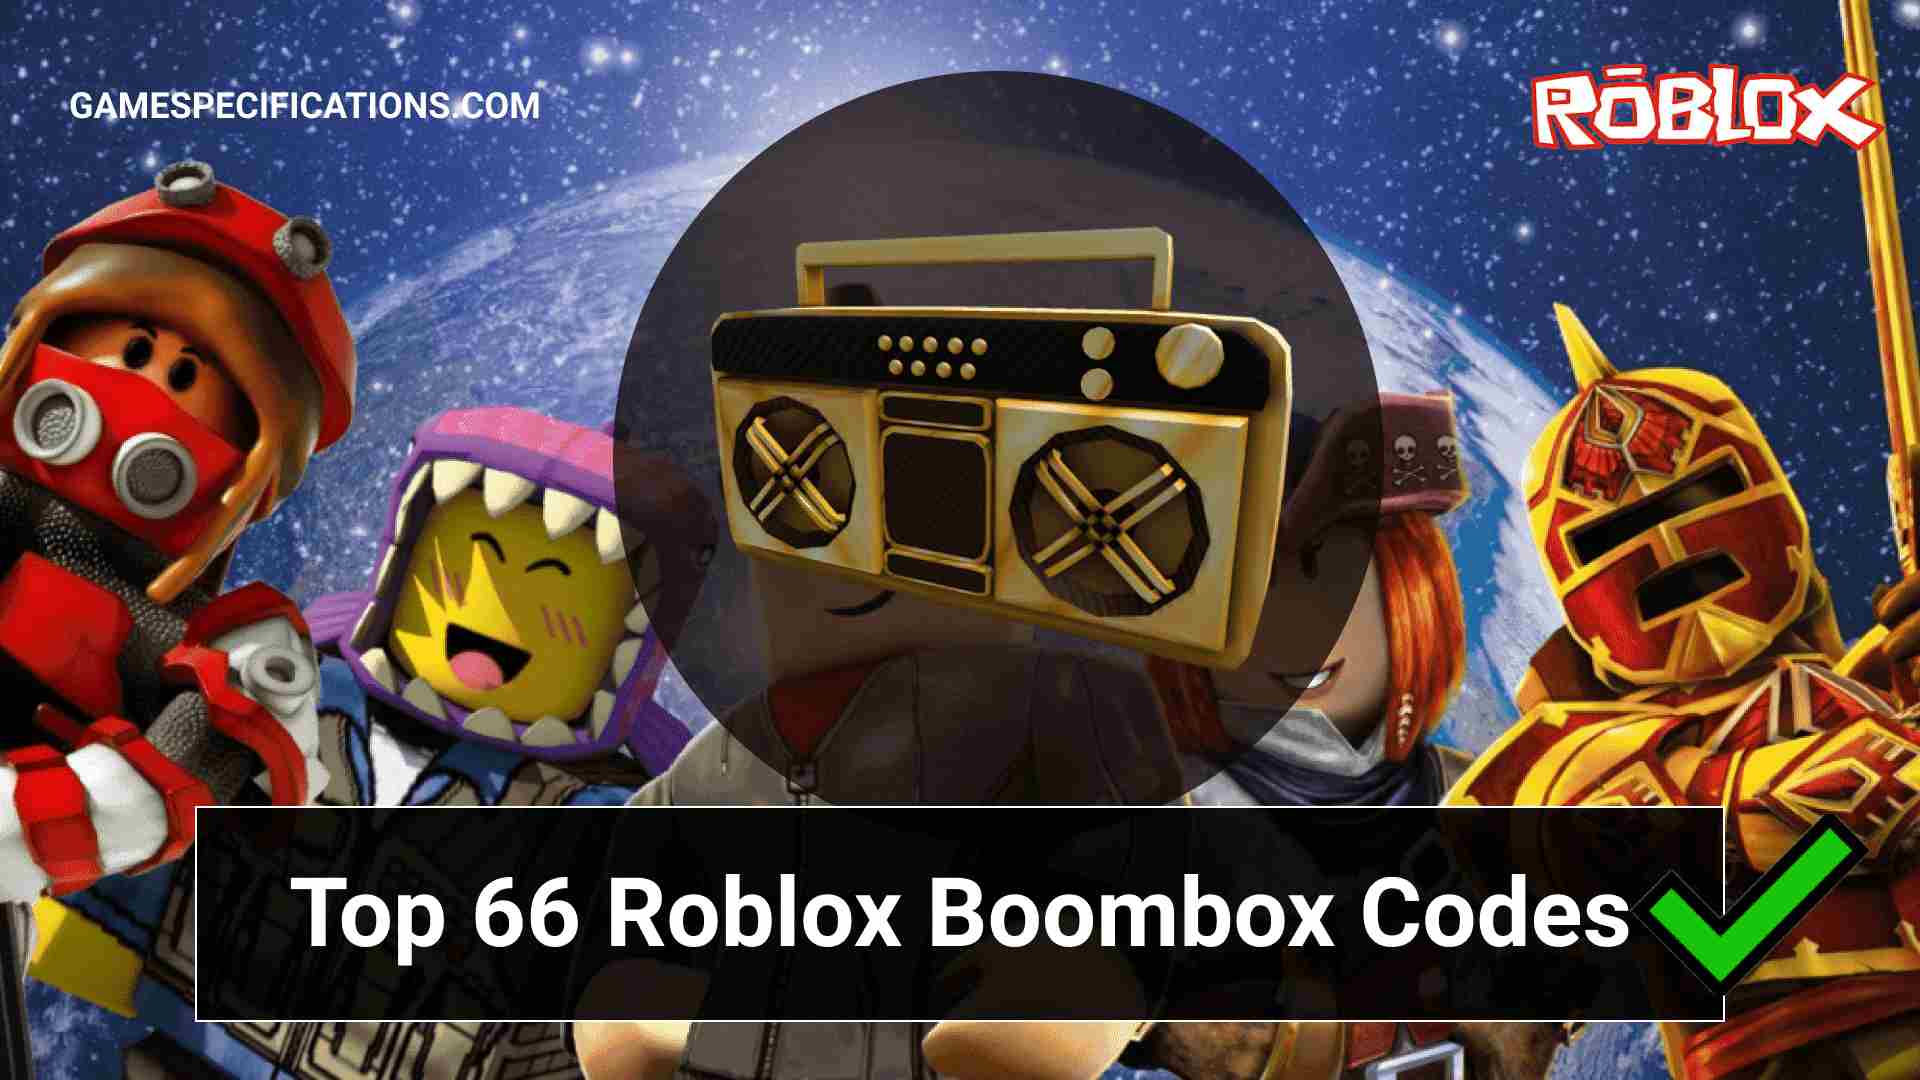 Codes For Boombox